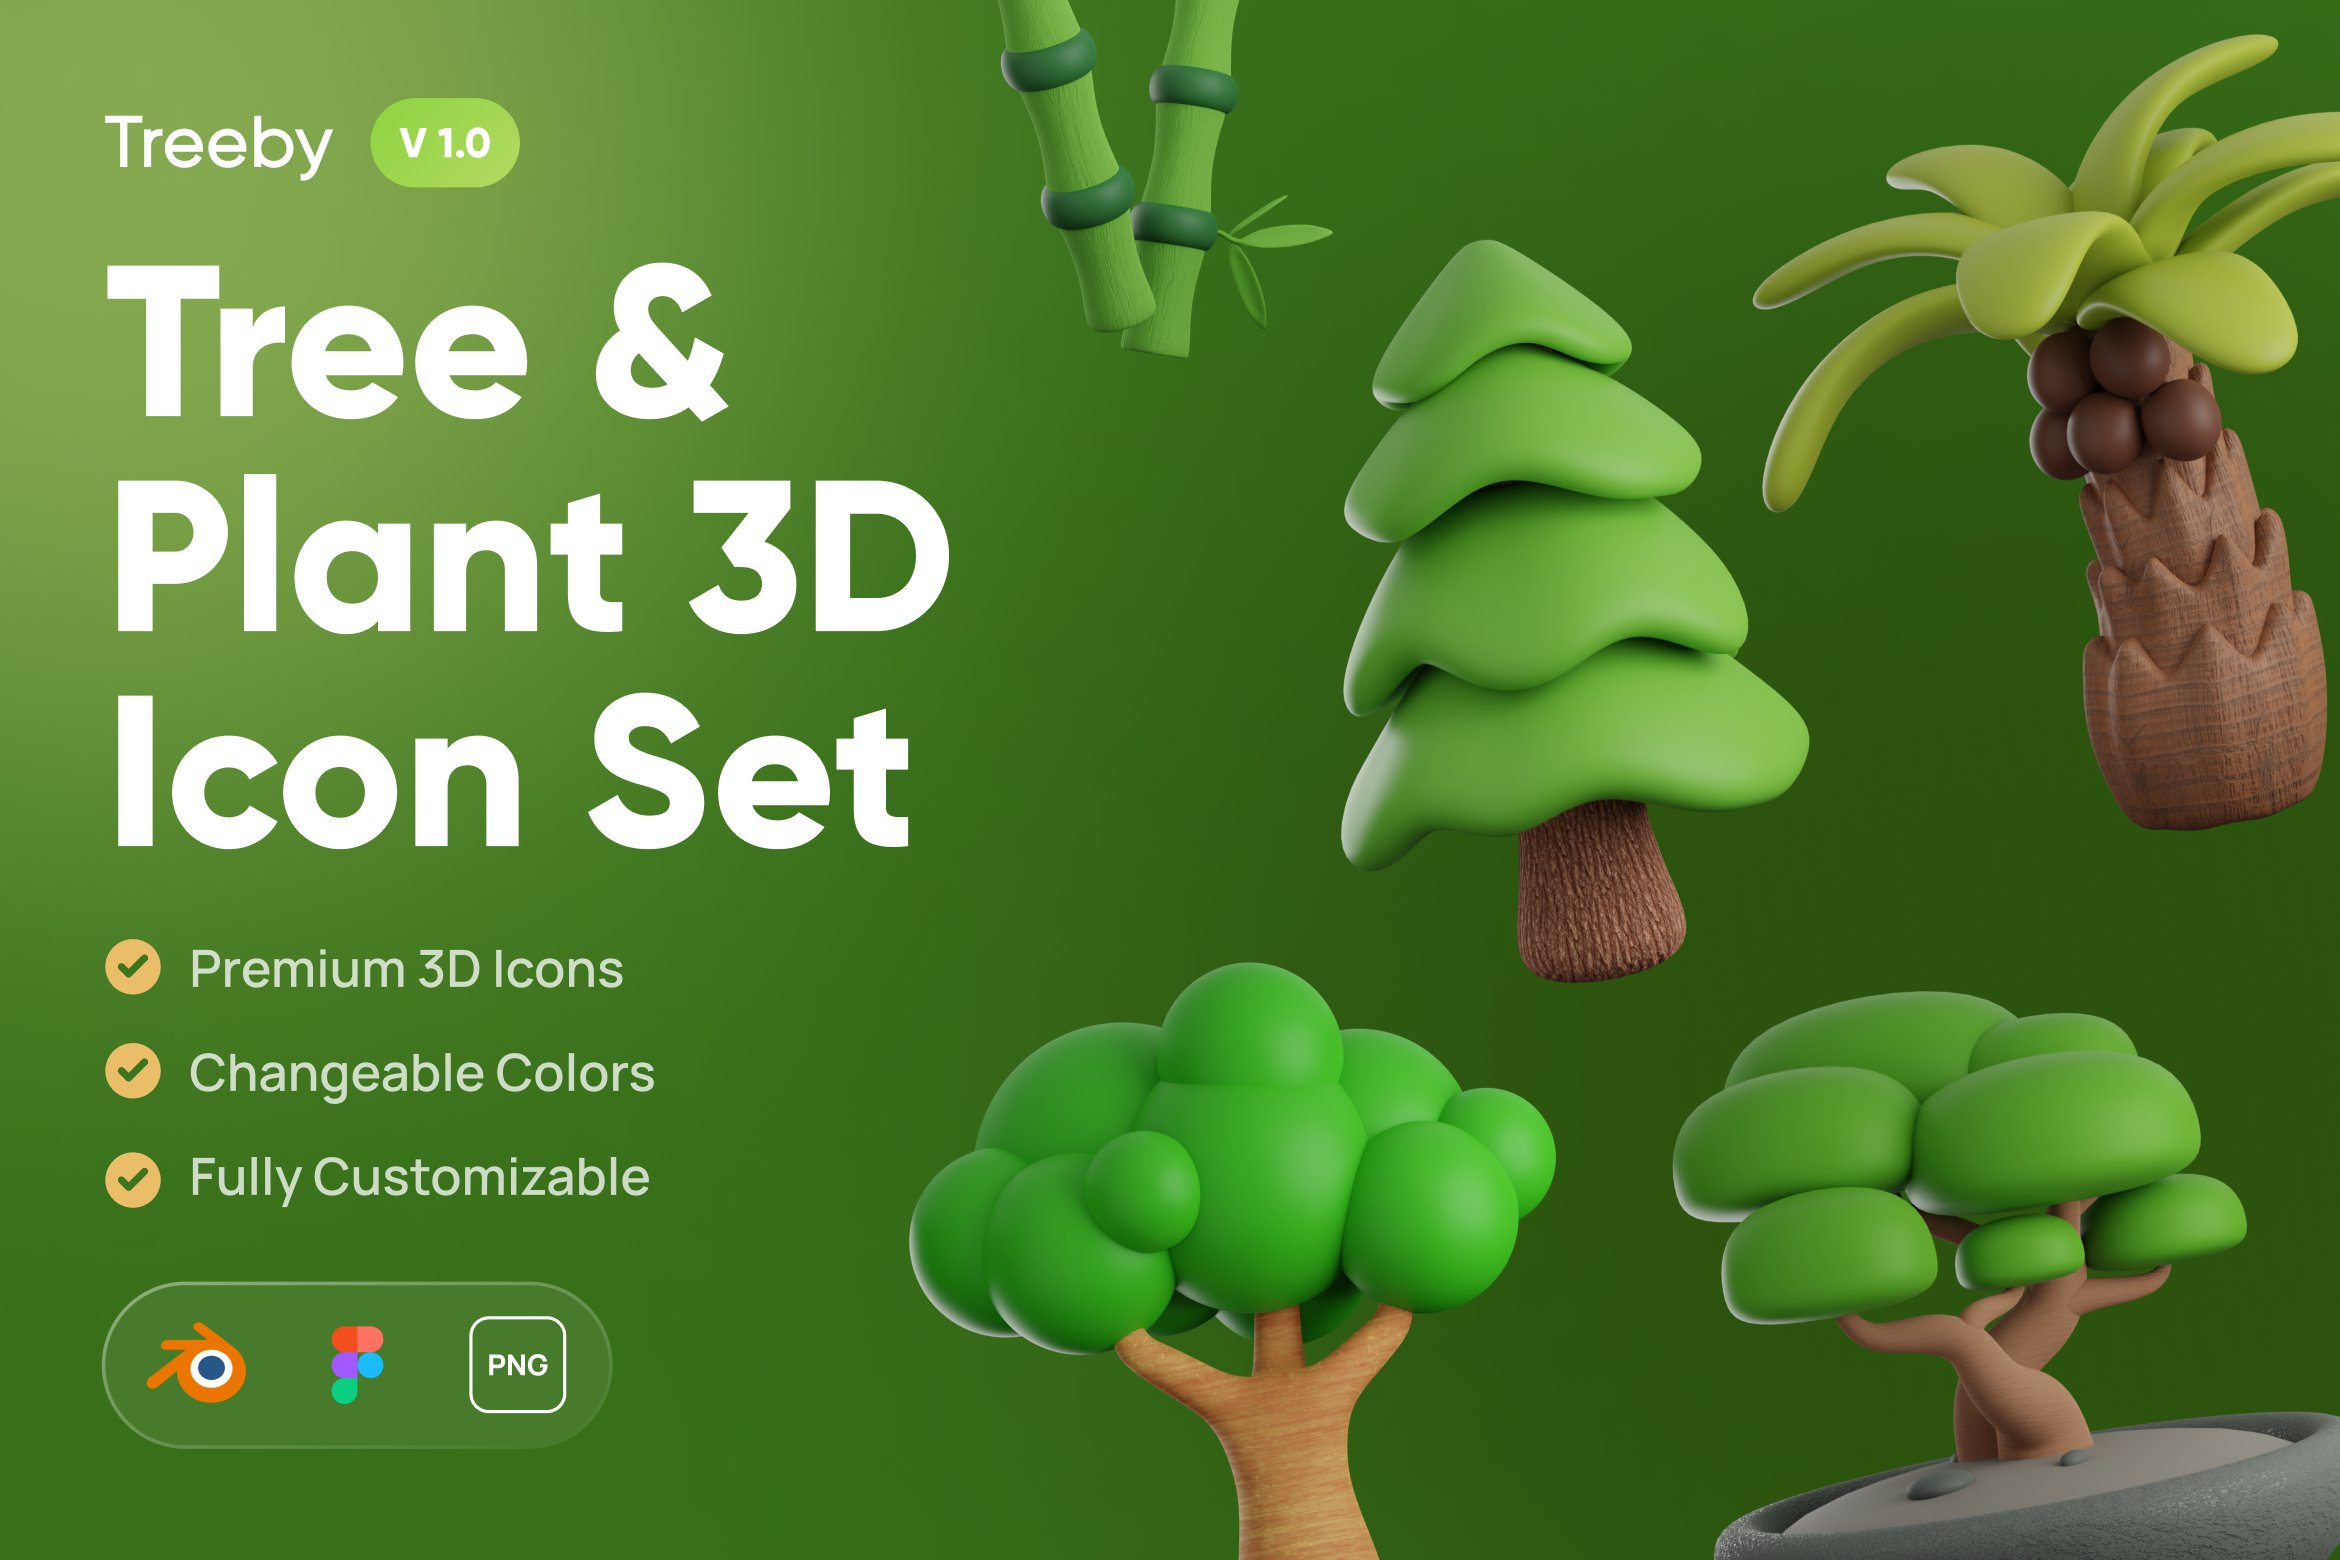 Treeby - Tree & Plant 3D Icon Set cover image.